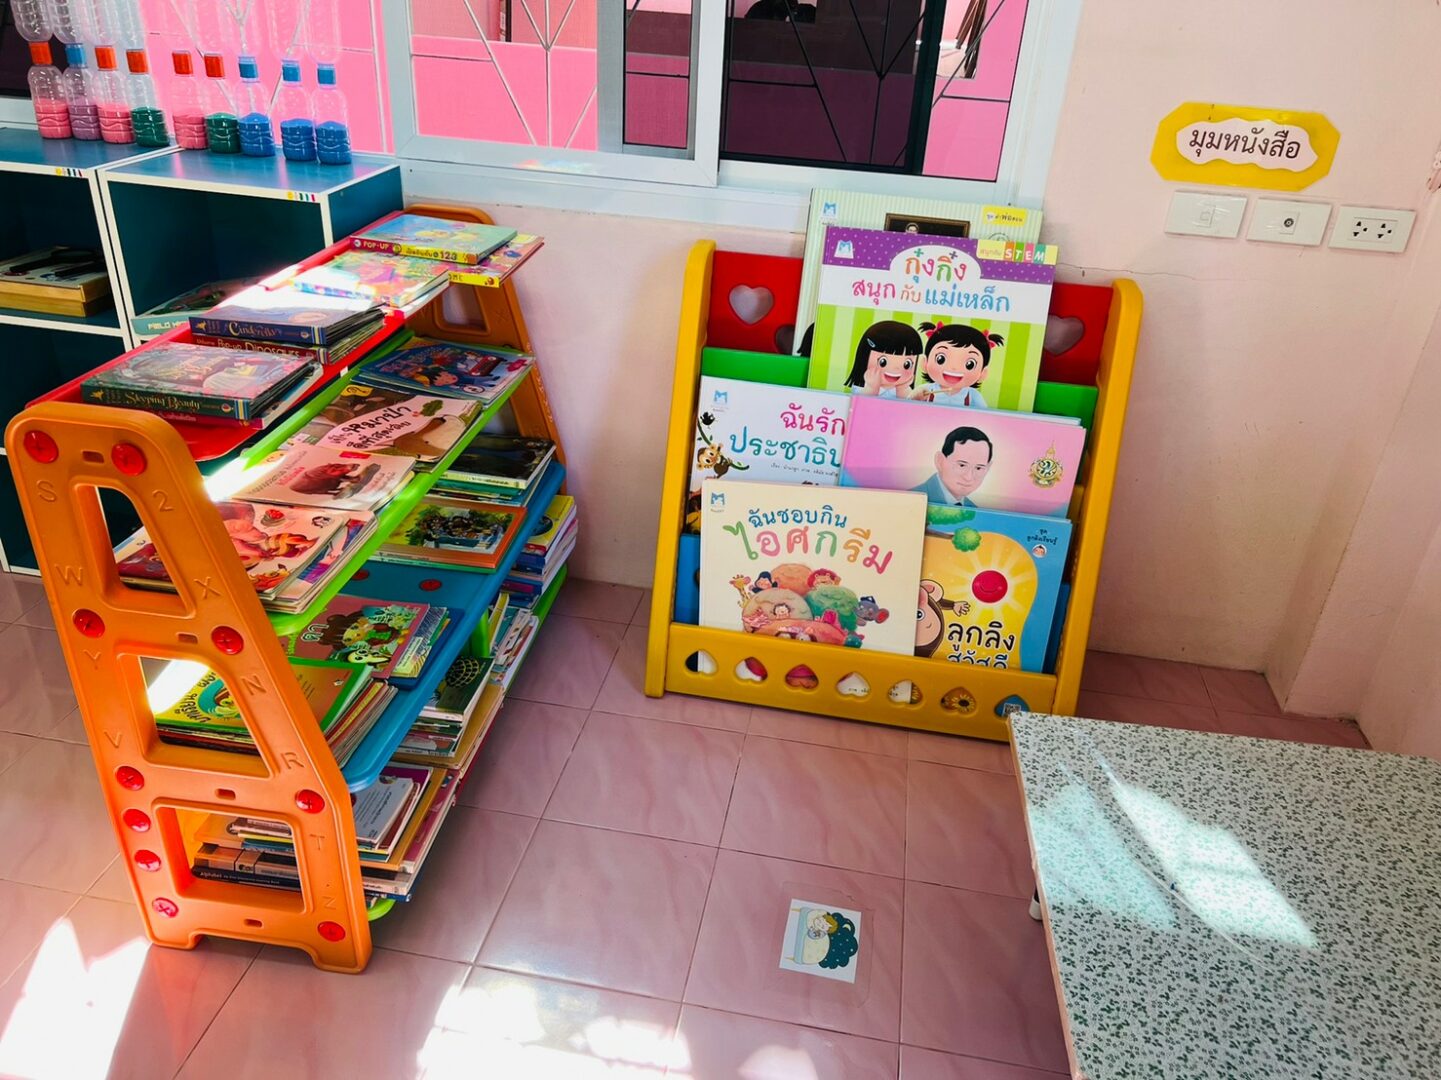 WU joining hands with the Child Development Center of Thai Buri Subdistrict Administrative Organization in designing and developing learning corners with the HighScope Curriculum